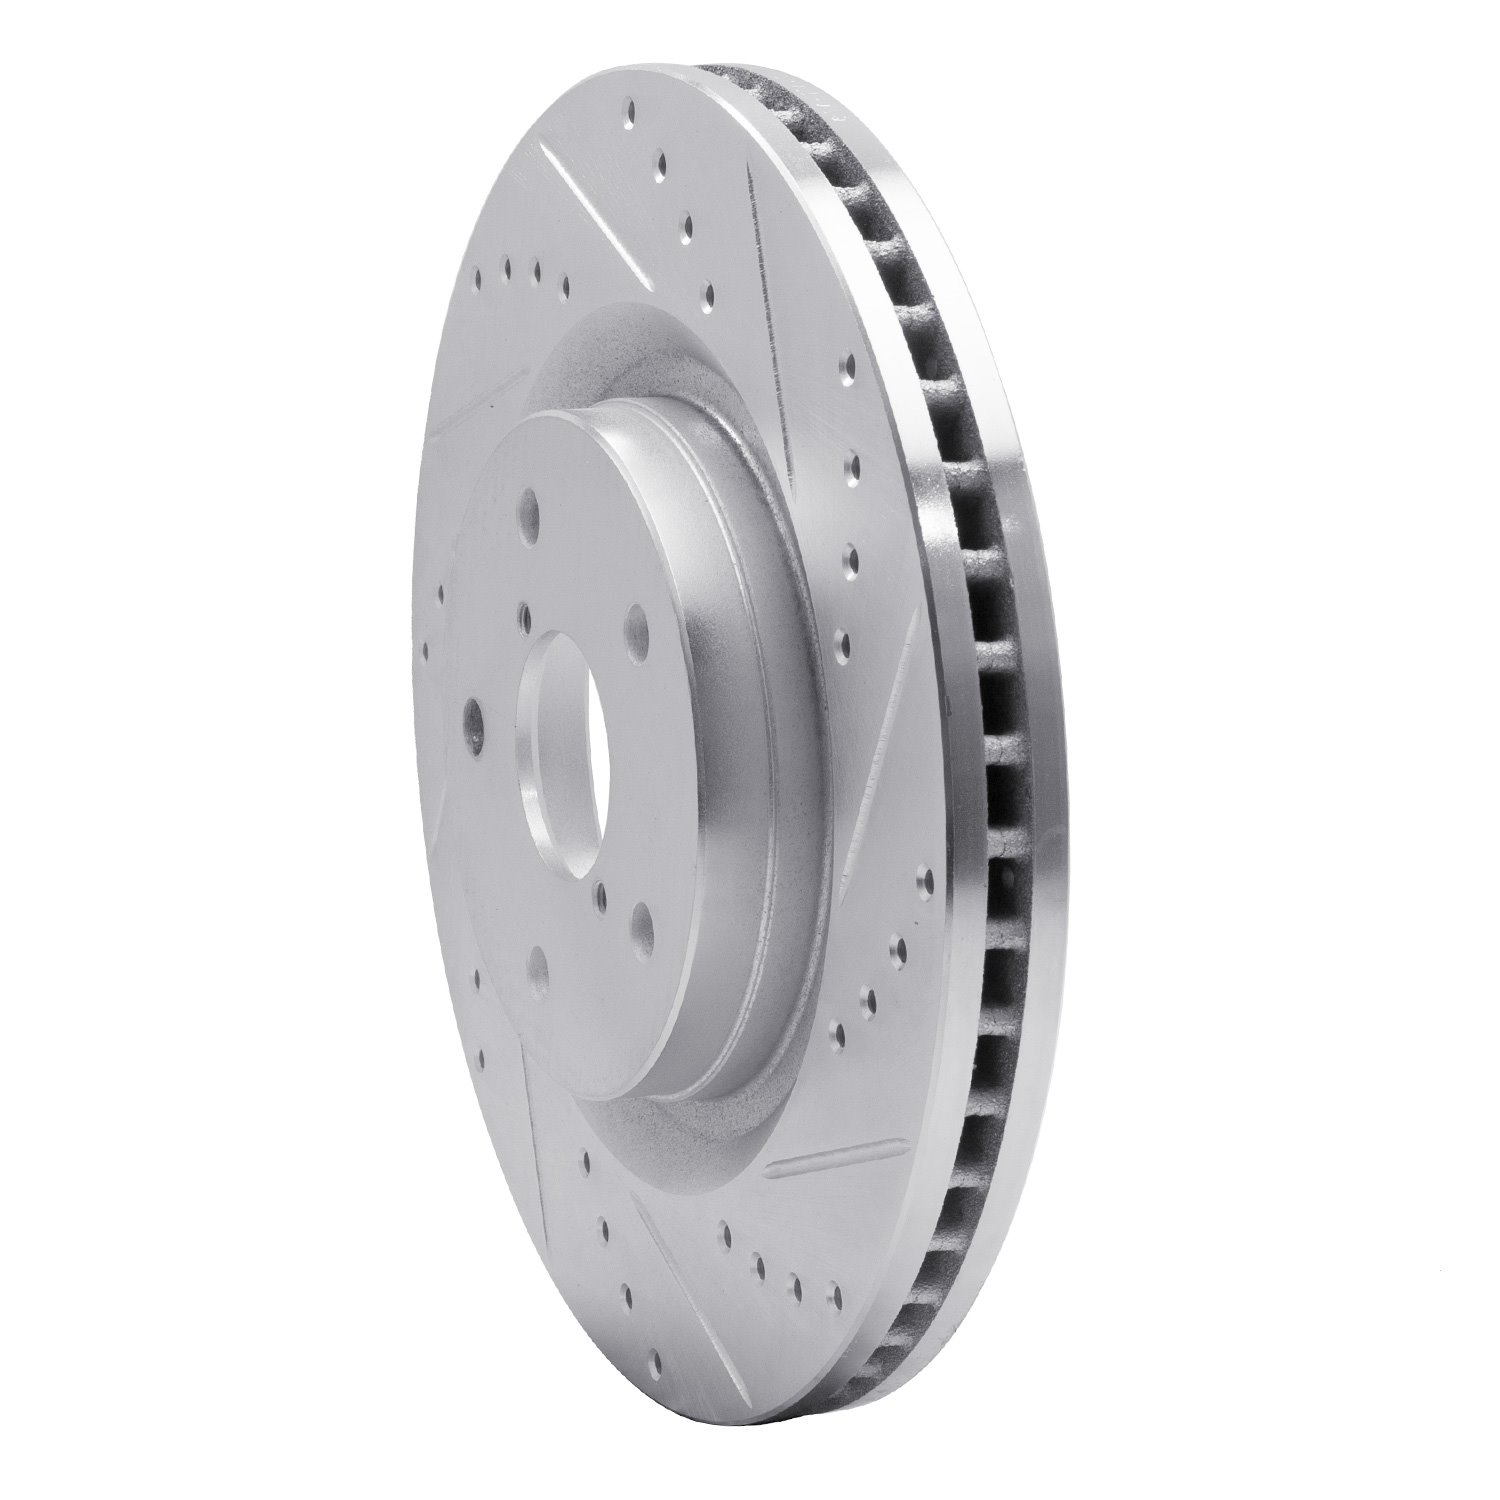 E-Line Drilled & Slotted Silver Brake Rotor, Fits Select Subaru, Position: Front Right